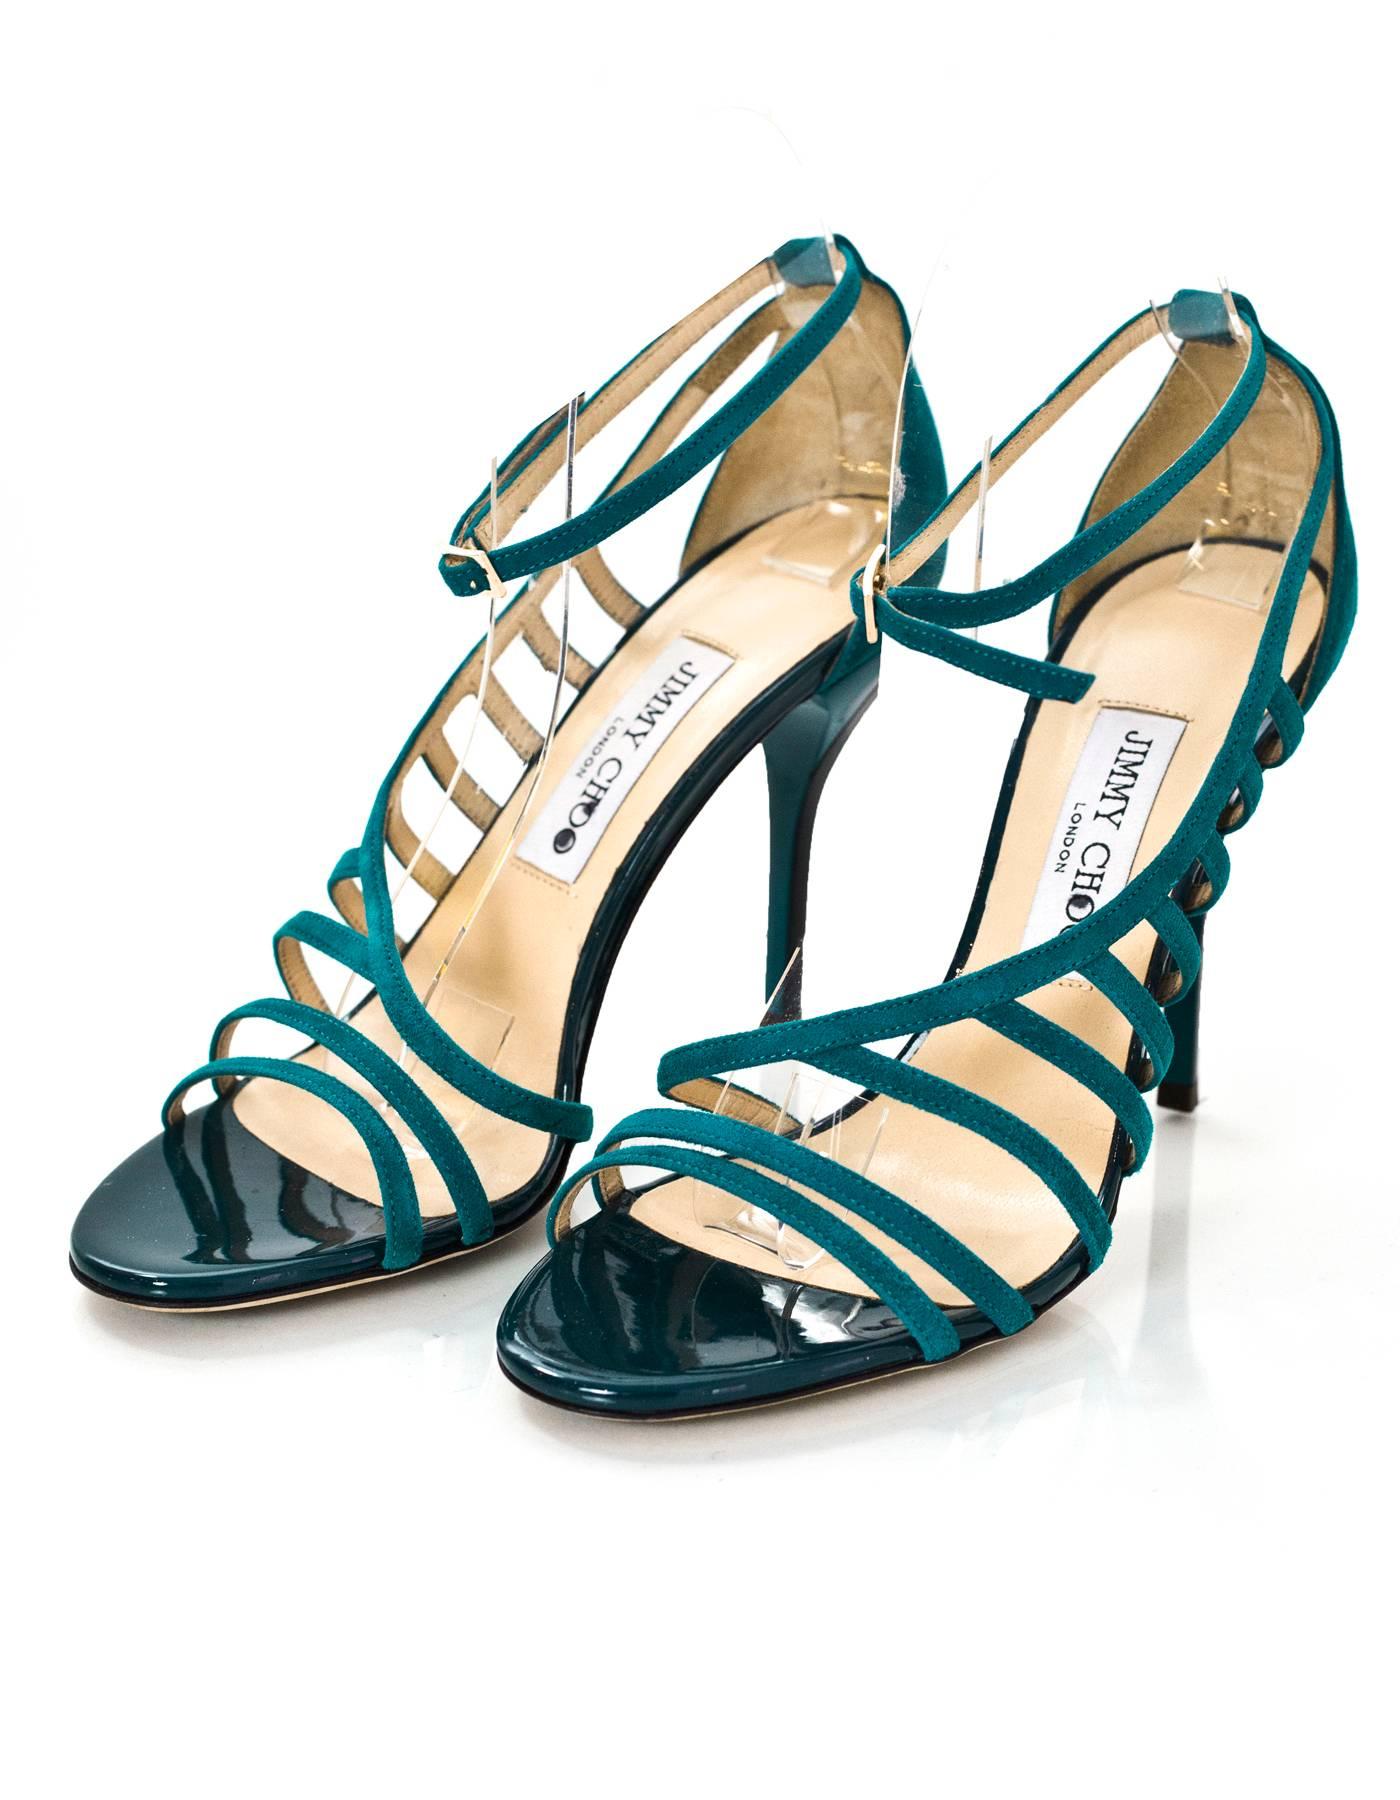 Jimmy Choo Blue Suede Strappy Sandals Sz 38

Made In: Italy
Color: Blue
Materials: Suede
Closure/Opening: Ankel strap with buckle closure
Sole Stamp: Jimmy Choo London Made in Italy 38
Overall Condition: Excellent pre-owned condition with the